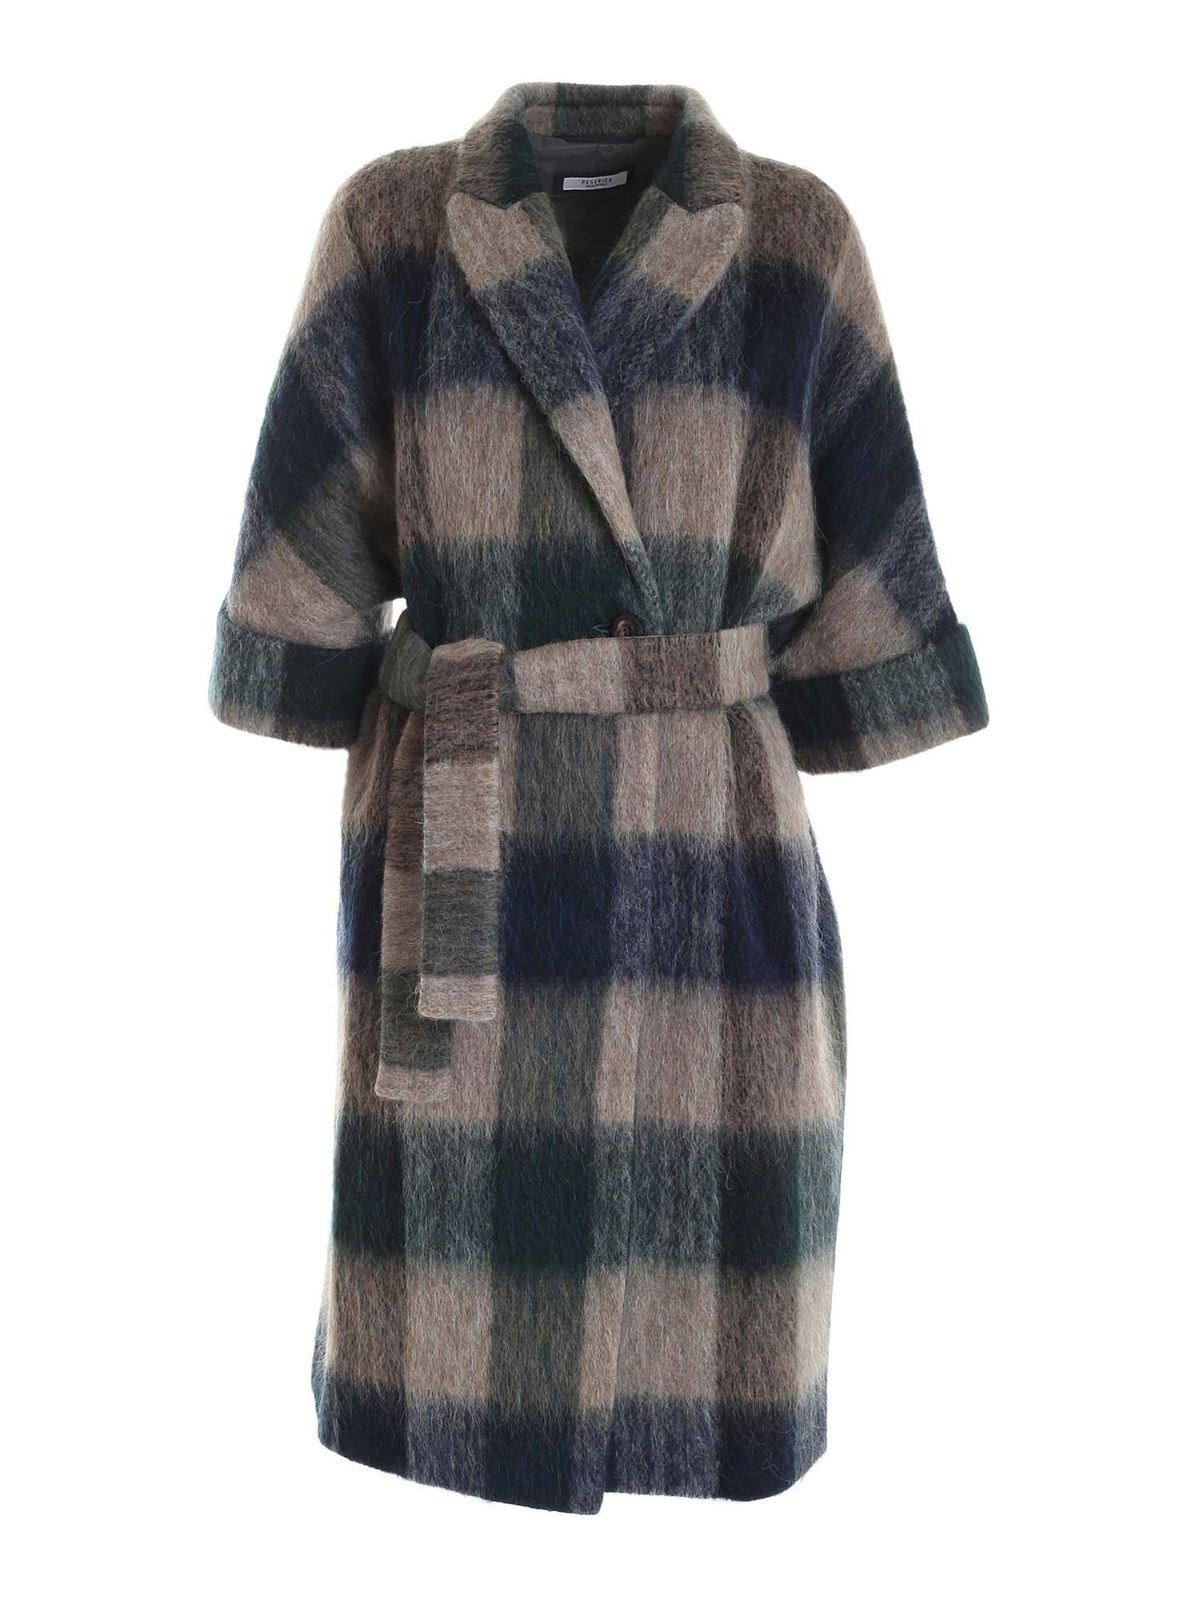 Long coats Peserico - Checked coat brown green and blue - S20051A05480939